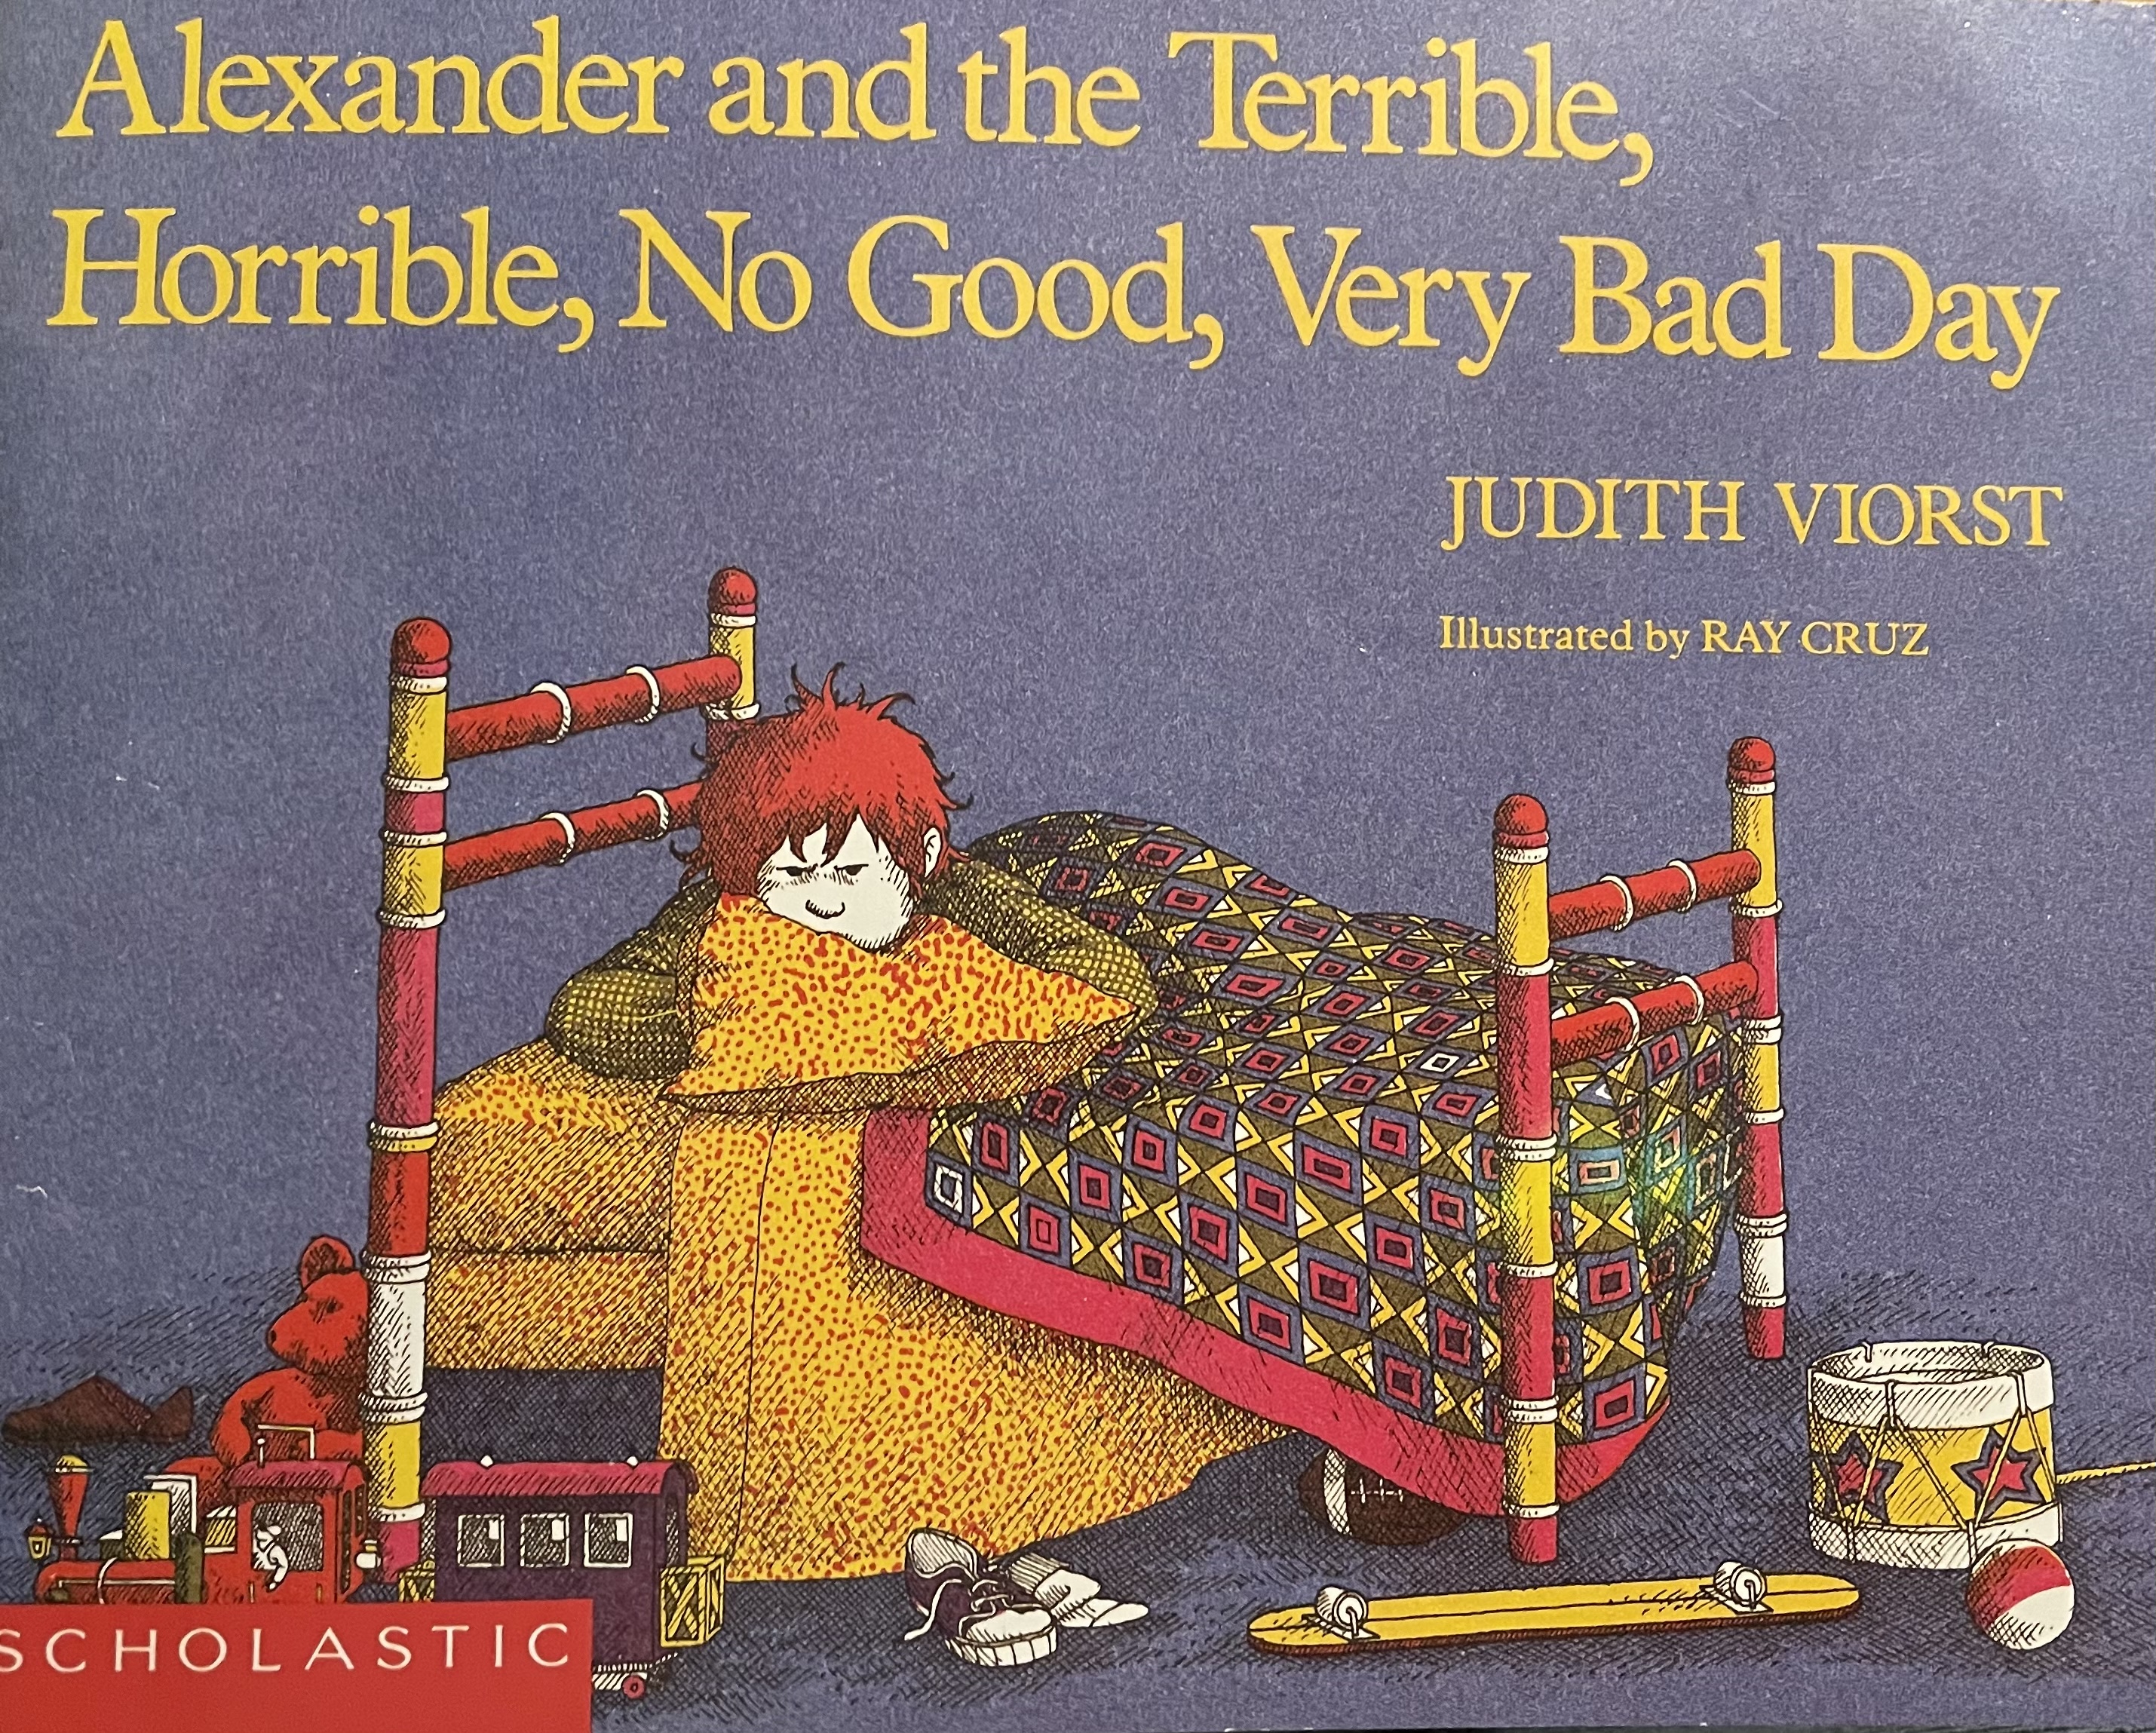 Judith Viorst: Alexander and the terrible, horrible, no good, very bad day (1987, Aladdin Paperbacks)